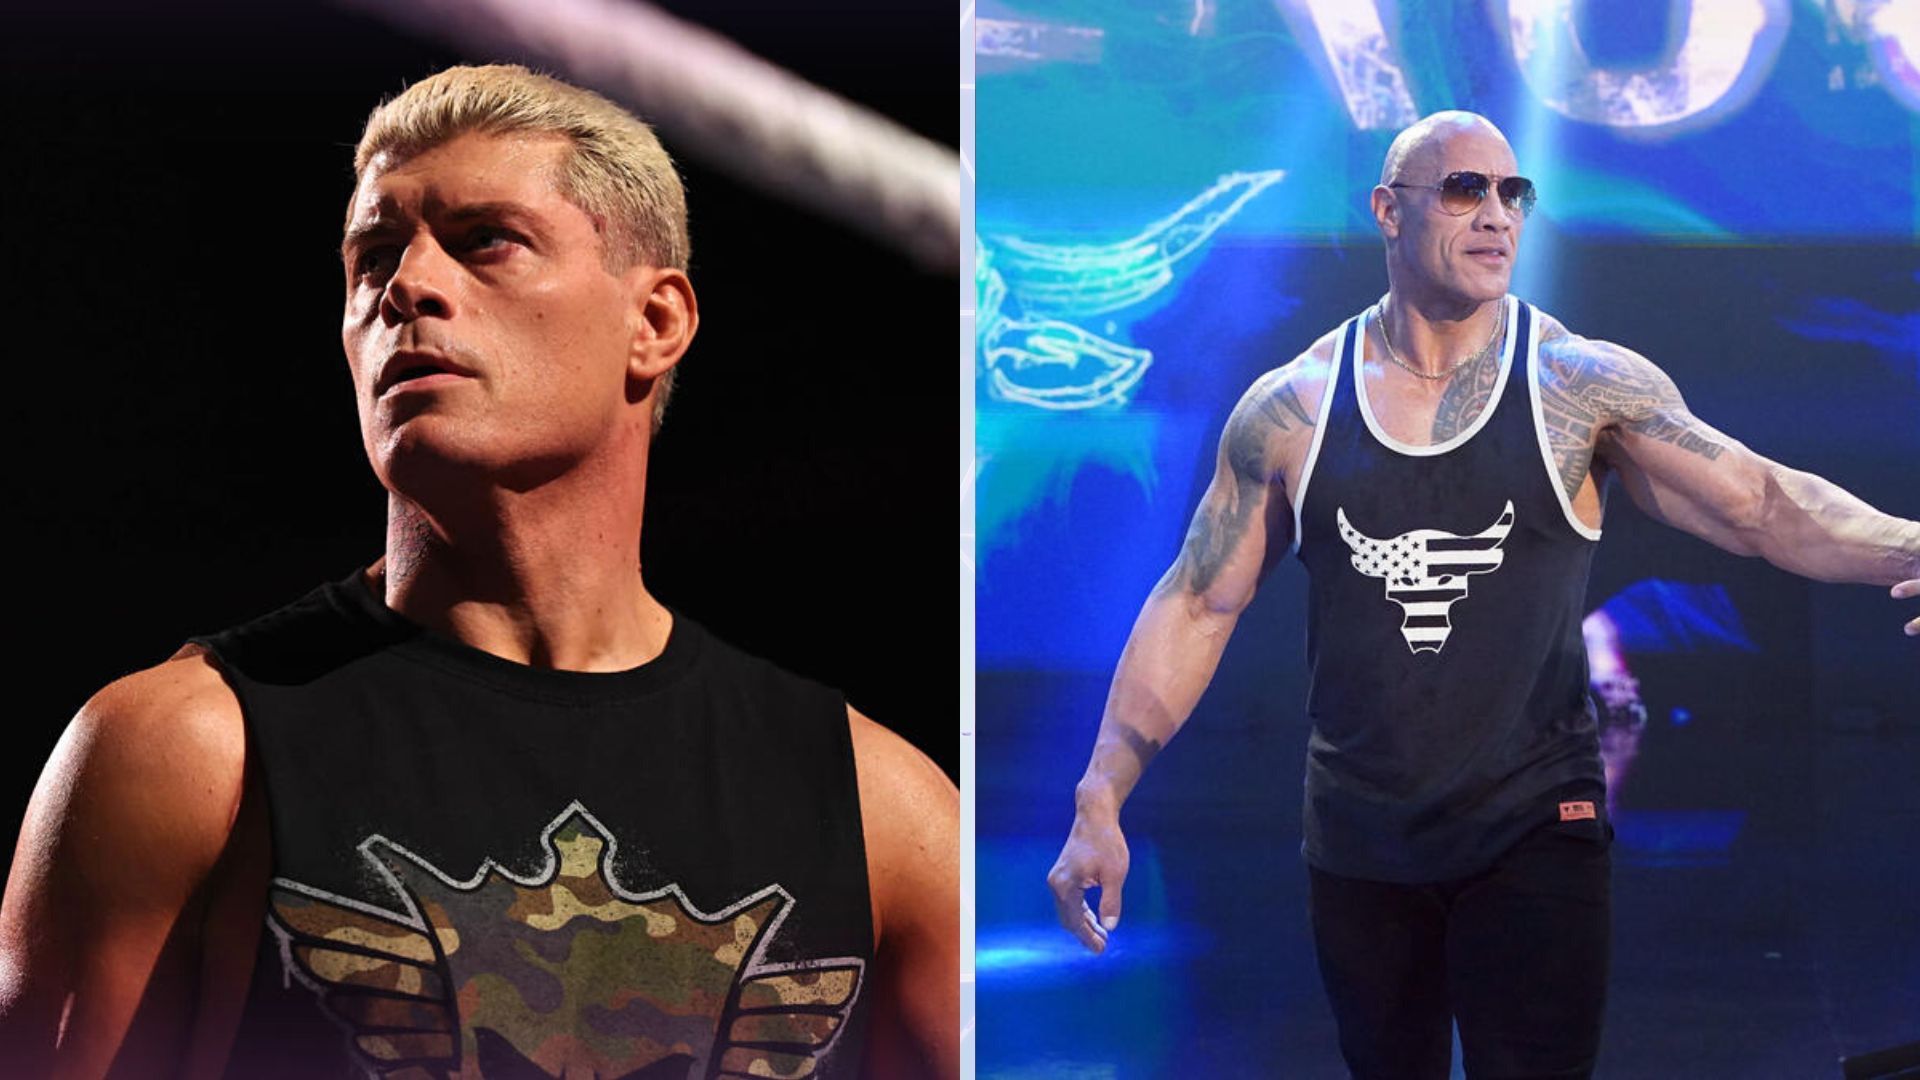 Cody Rhodes and The Rock were on Monday Night RAW this week